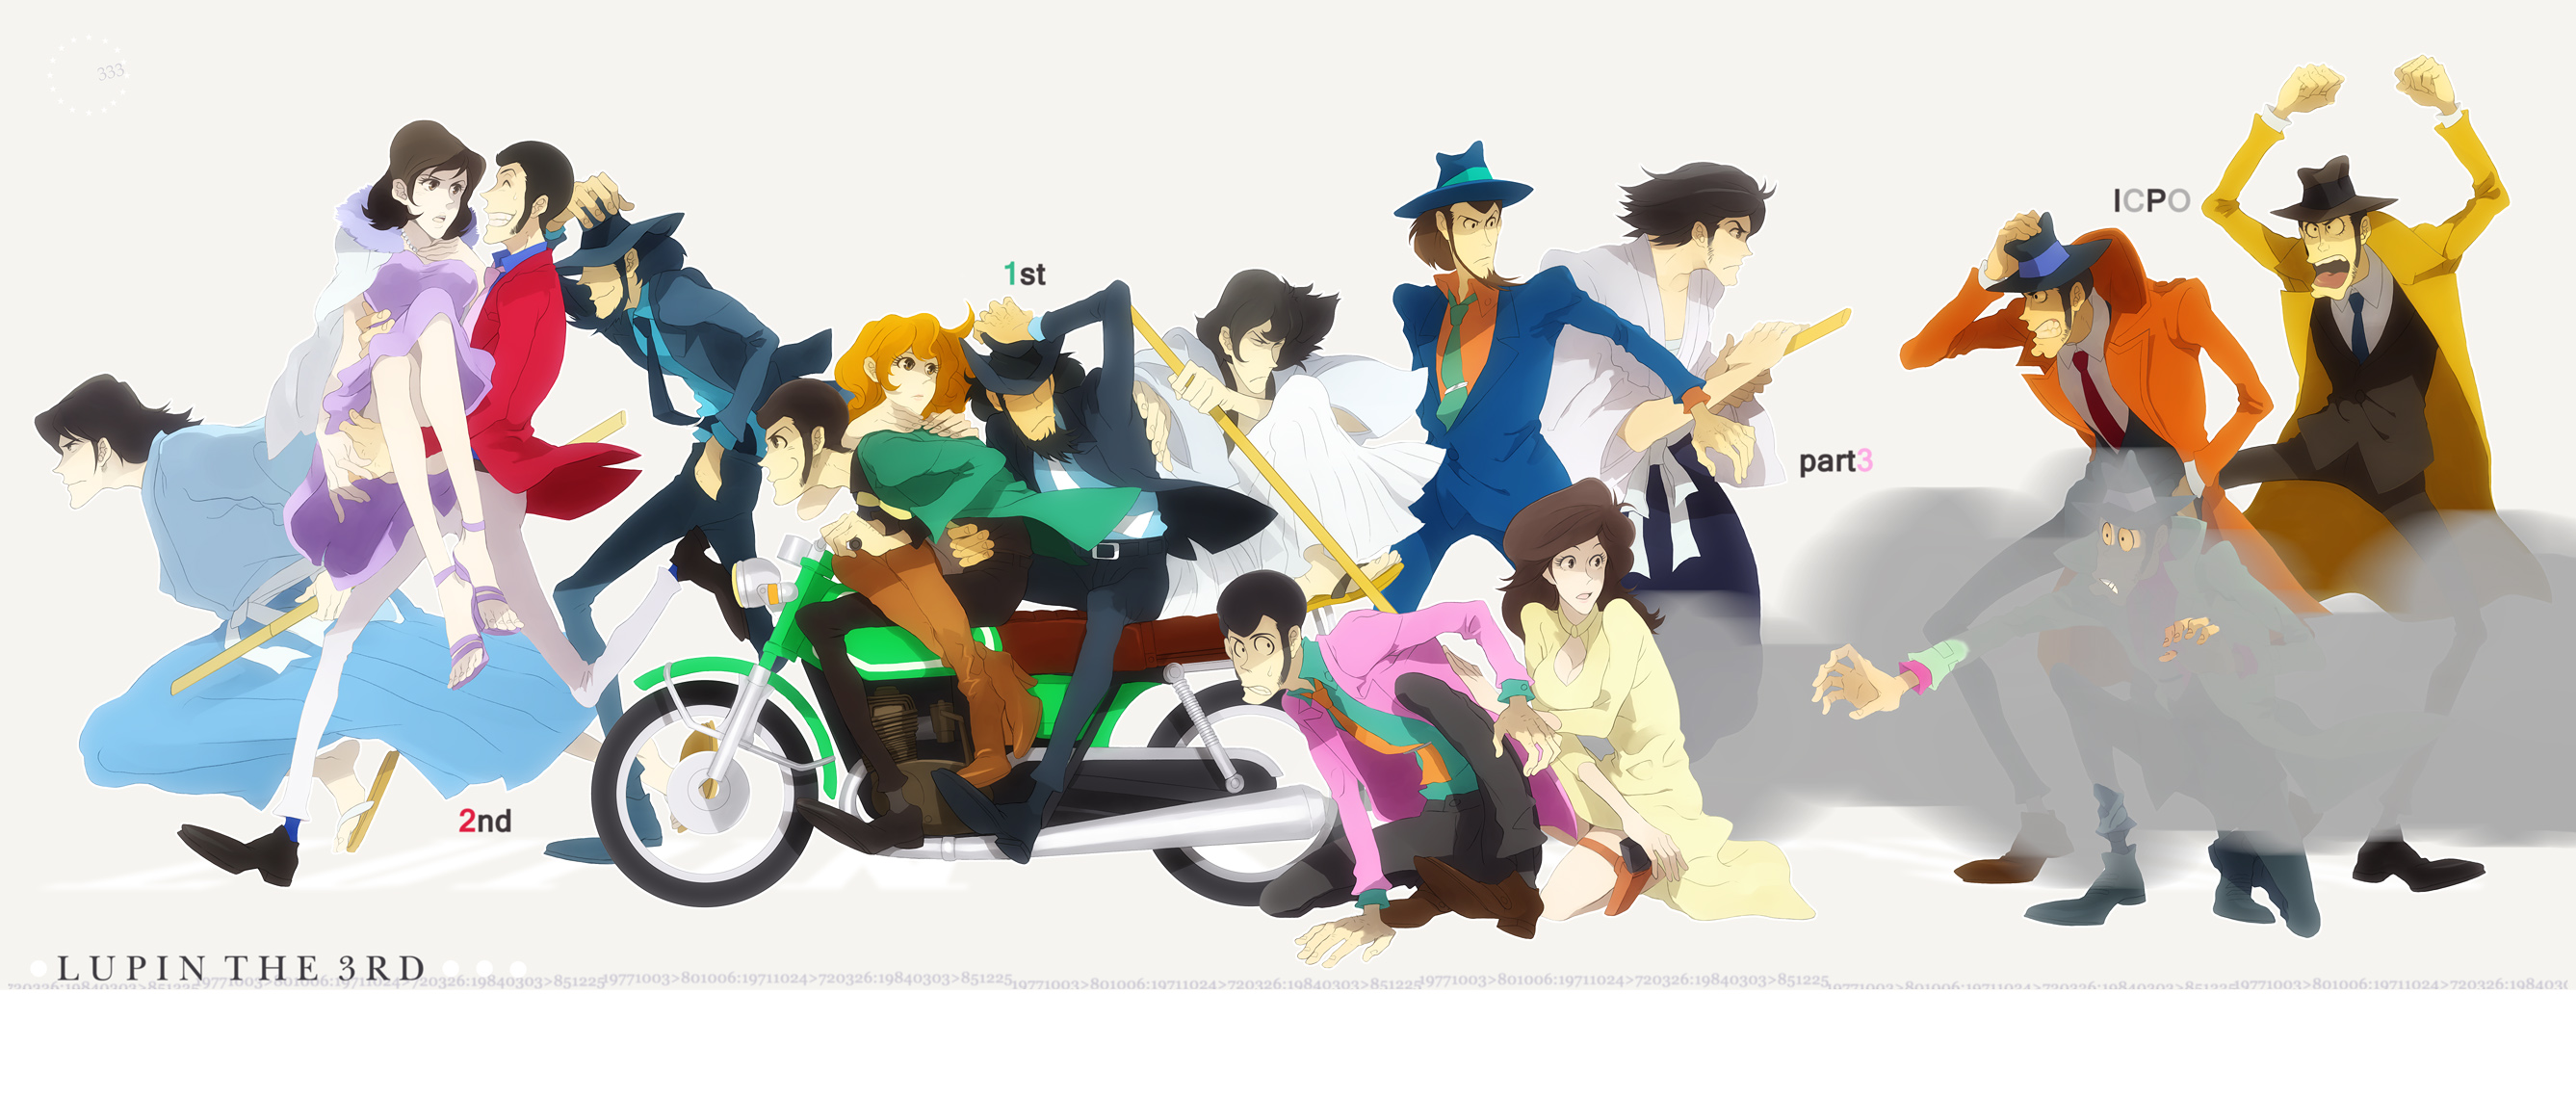 30+ Lupin The Third HD Wallpapers and Backgrounds